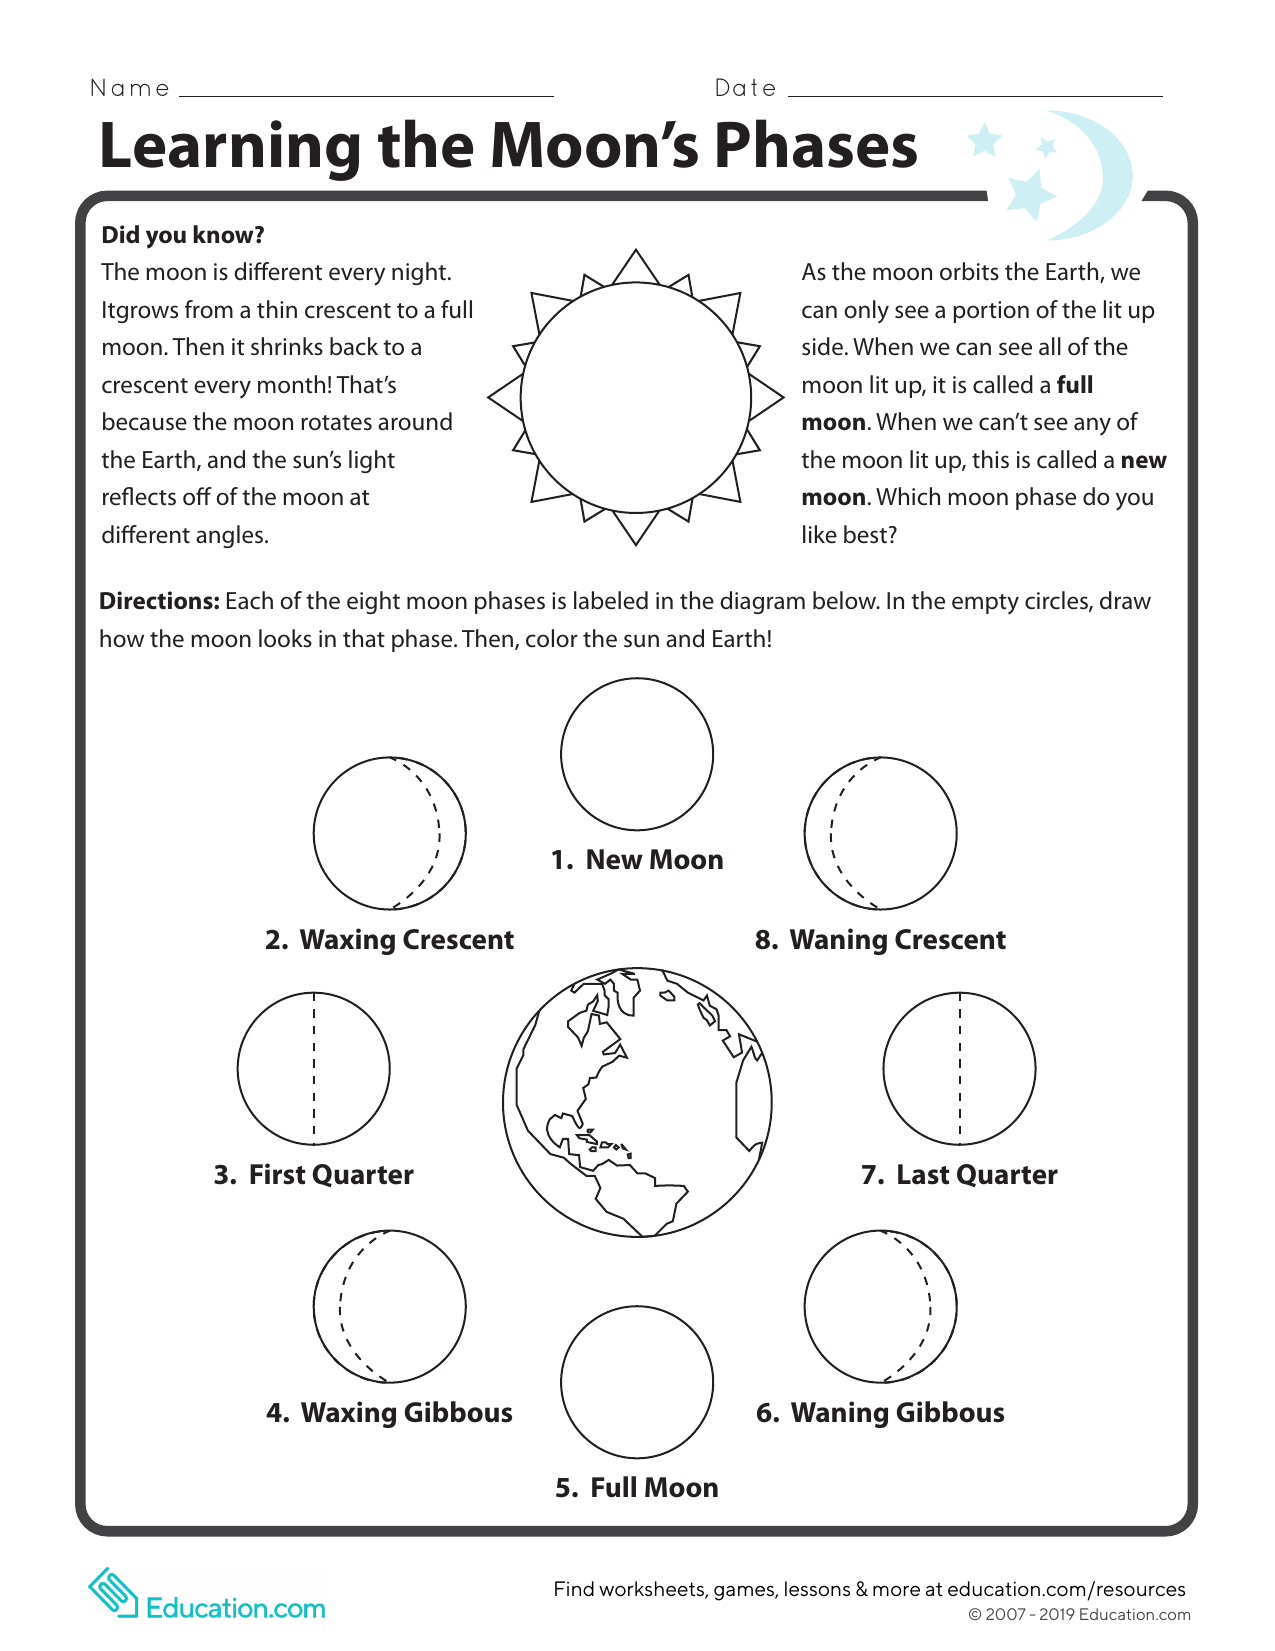 learning-moon-phases In Moon Phases Worksheet Answers